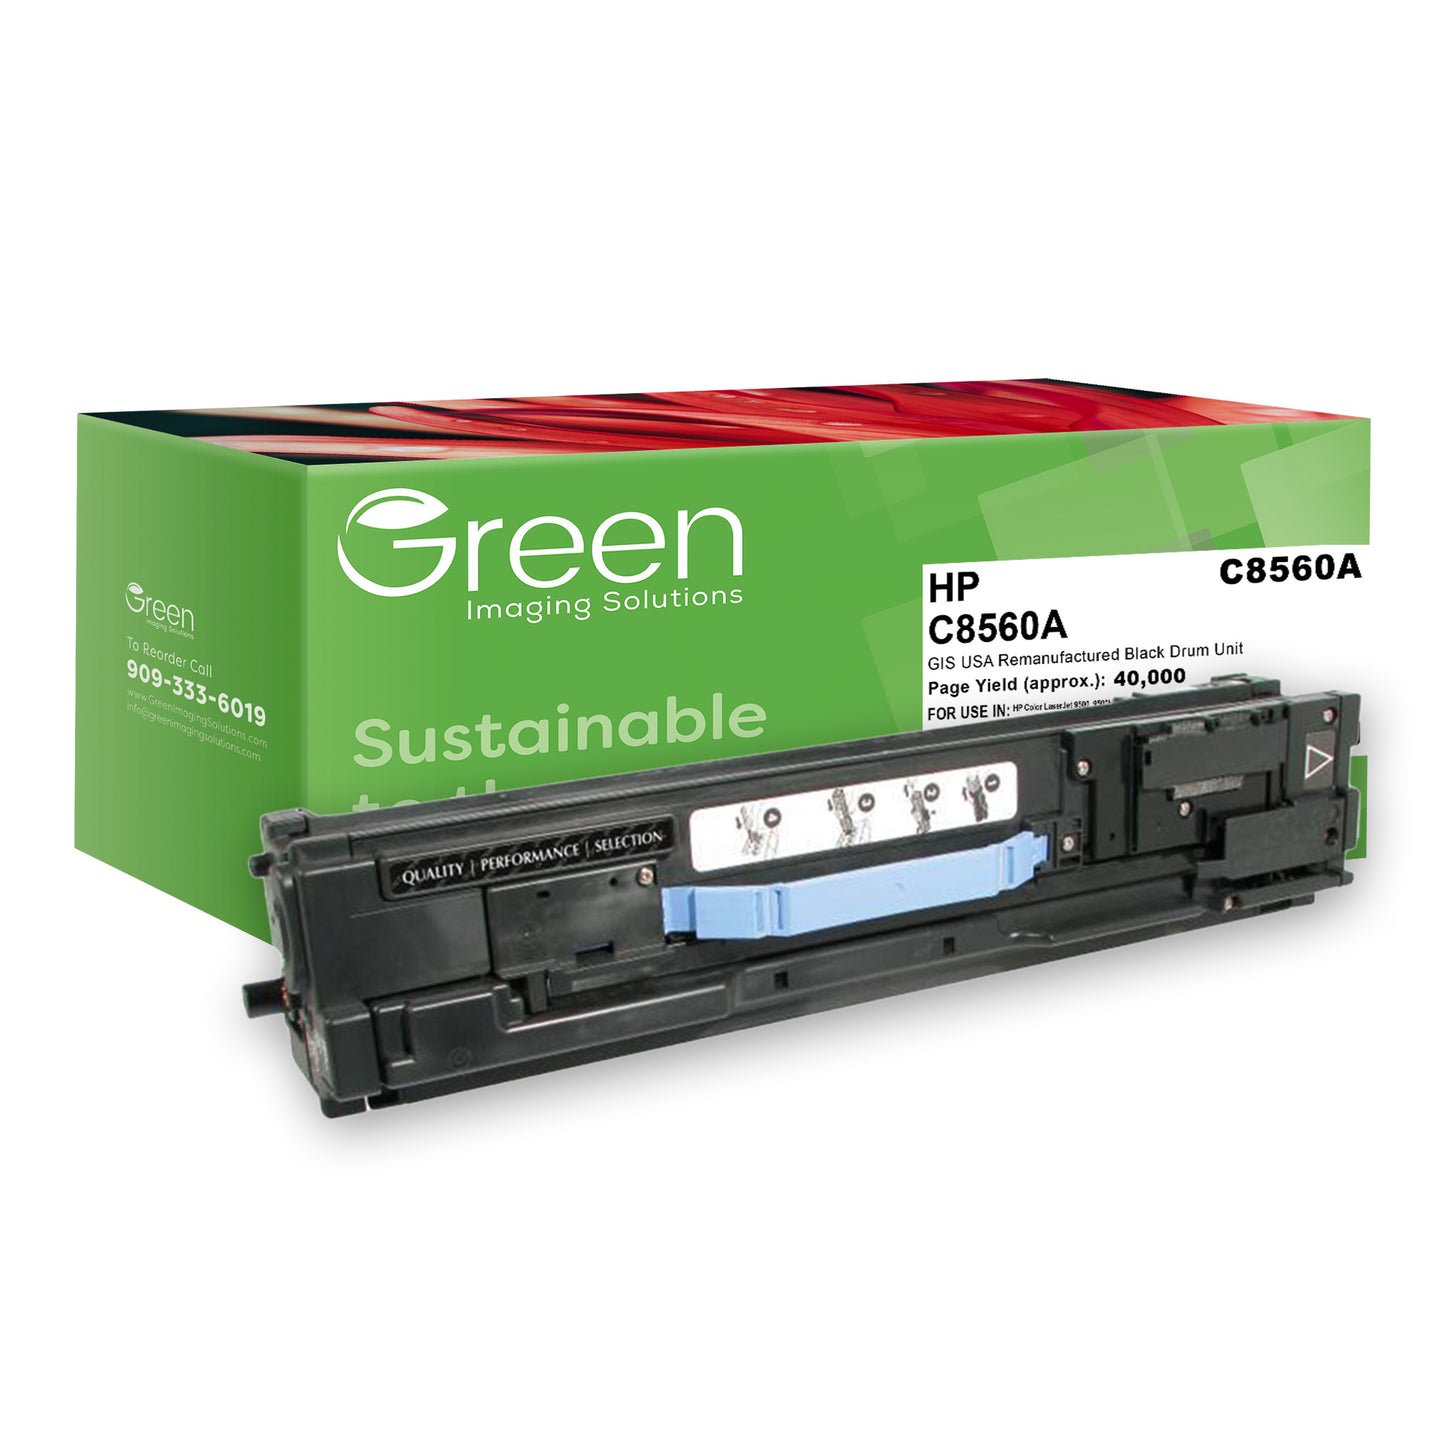 Green Imaging Solutions USA Remanufactured Black Drum Unit for HP 822A (C8560A)